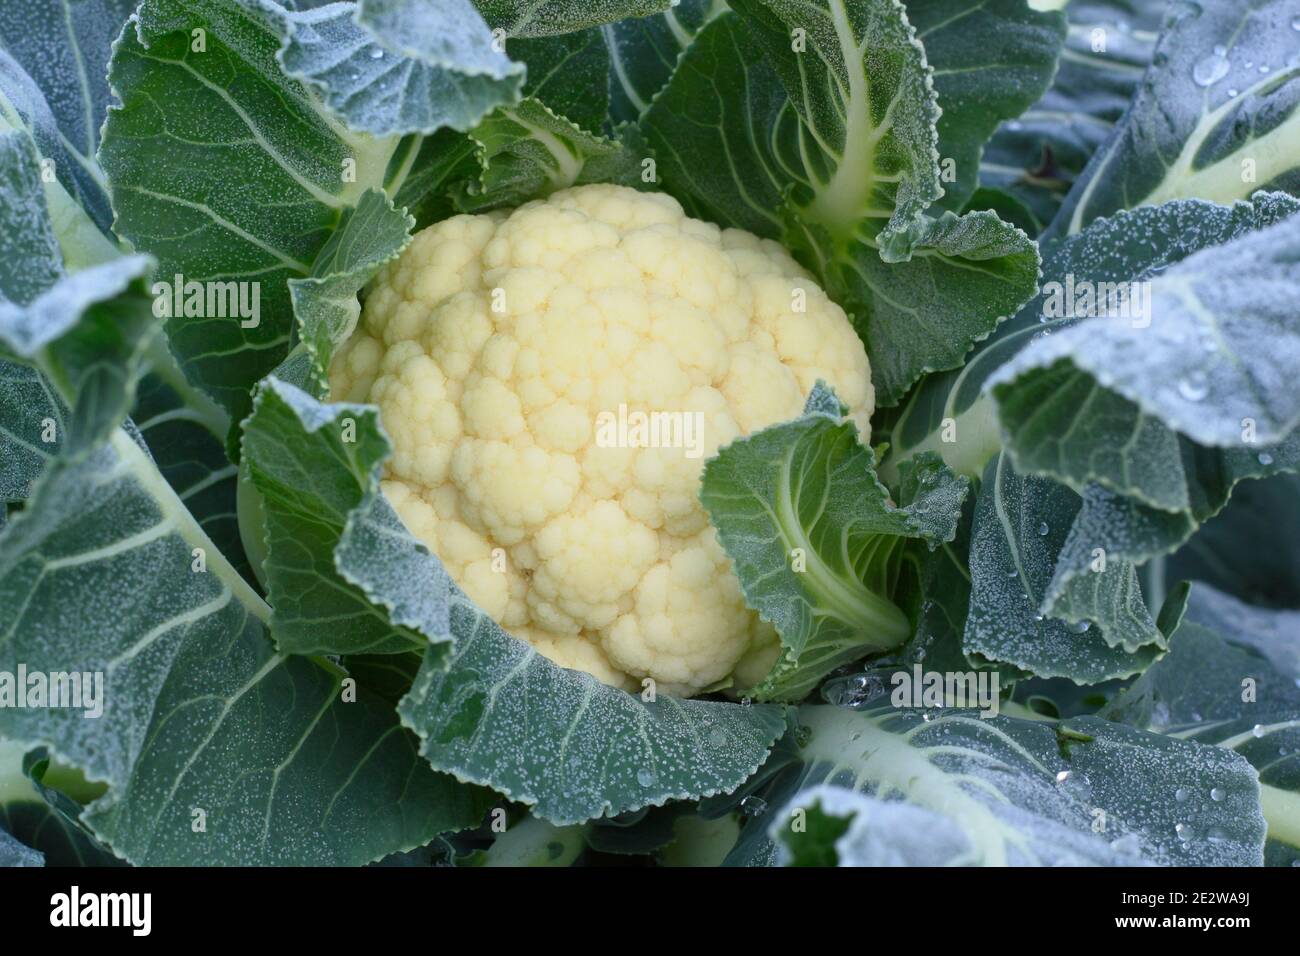 Frost on late cropping cauliflower 'Triomphant', ready for harvesting. January. Brassica oleracea var. botrytis. Stock Photo